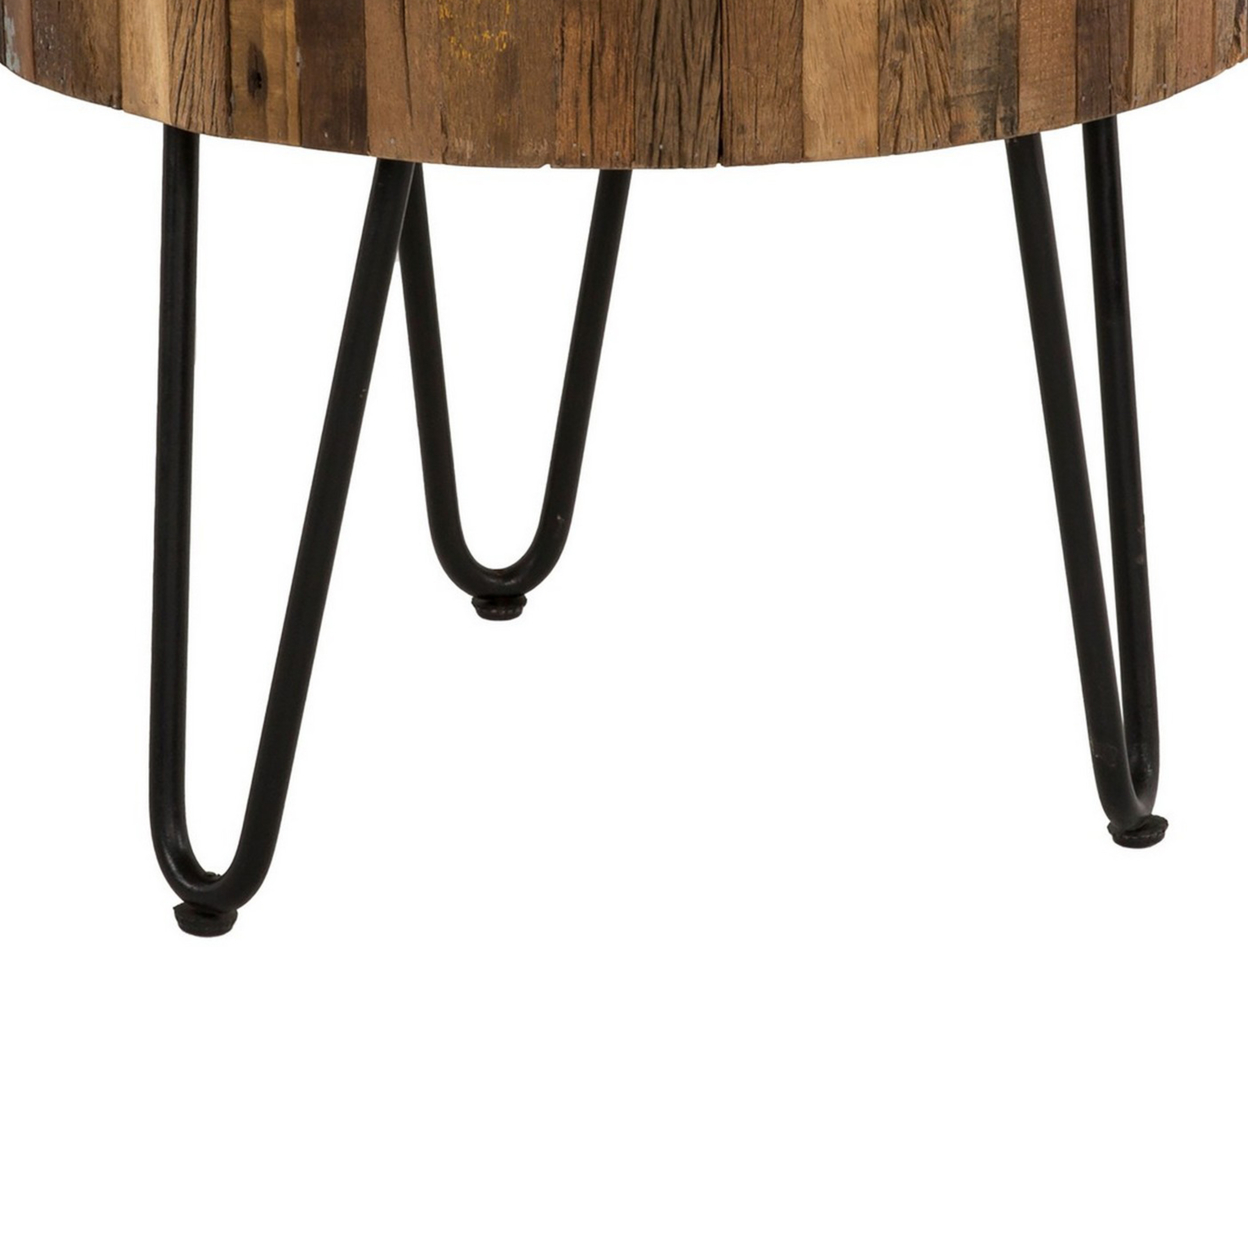 Zoro 22 Inch End Table, Reclaimed Wood, Hairpin Legs, Brown And Black- Saltoro Sherpi